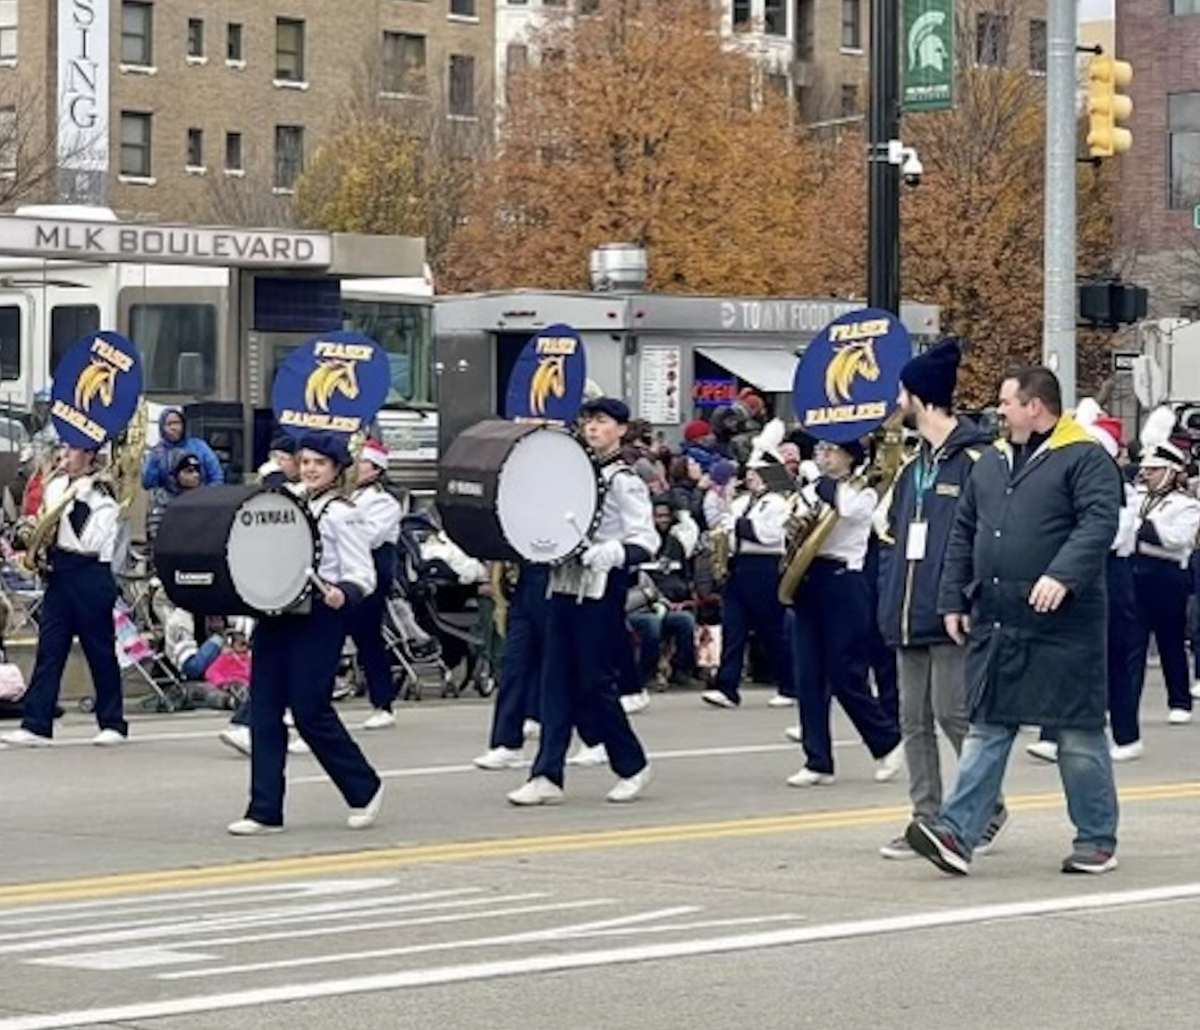 The Fraser High School Band walking in The Detroit Thanksgiving Day Parade.